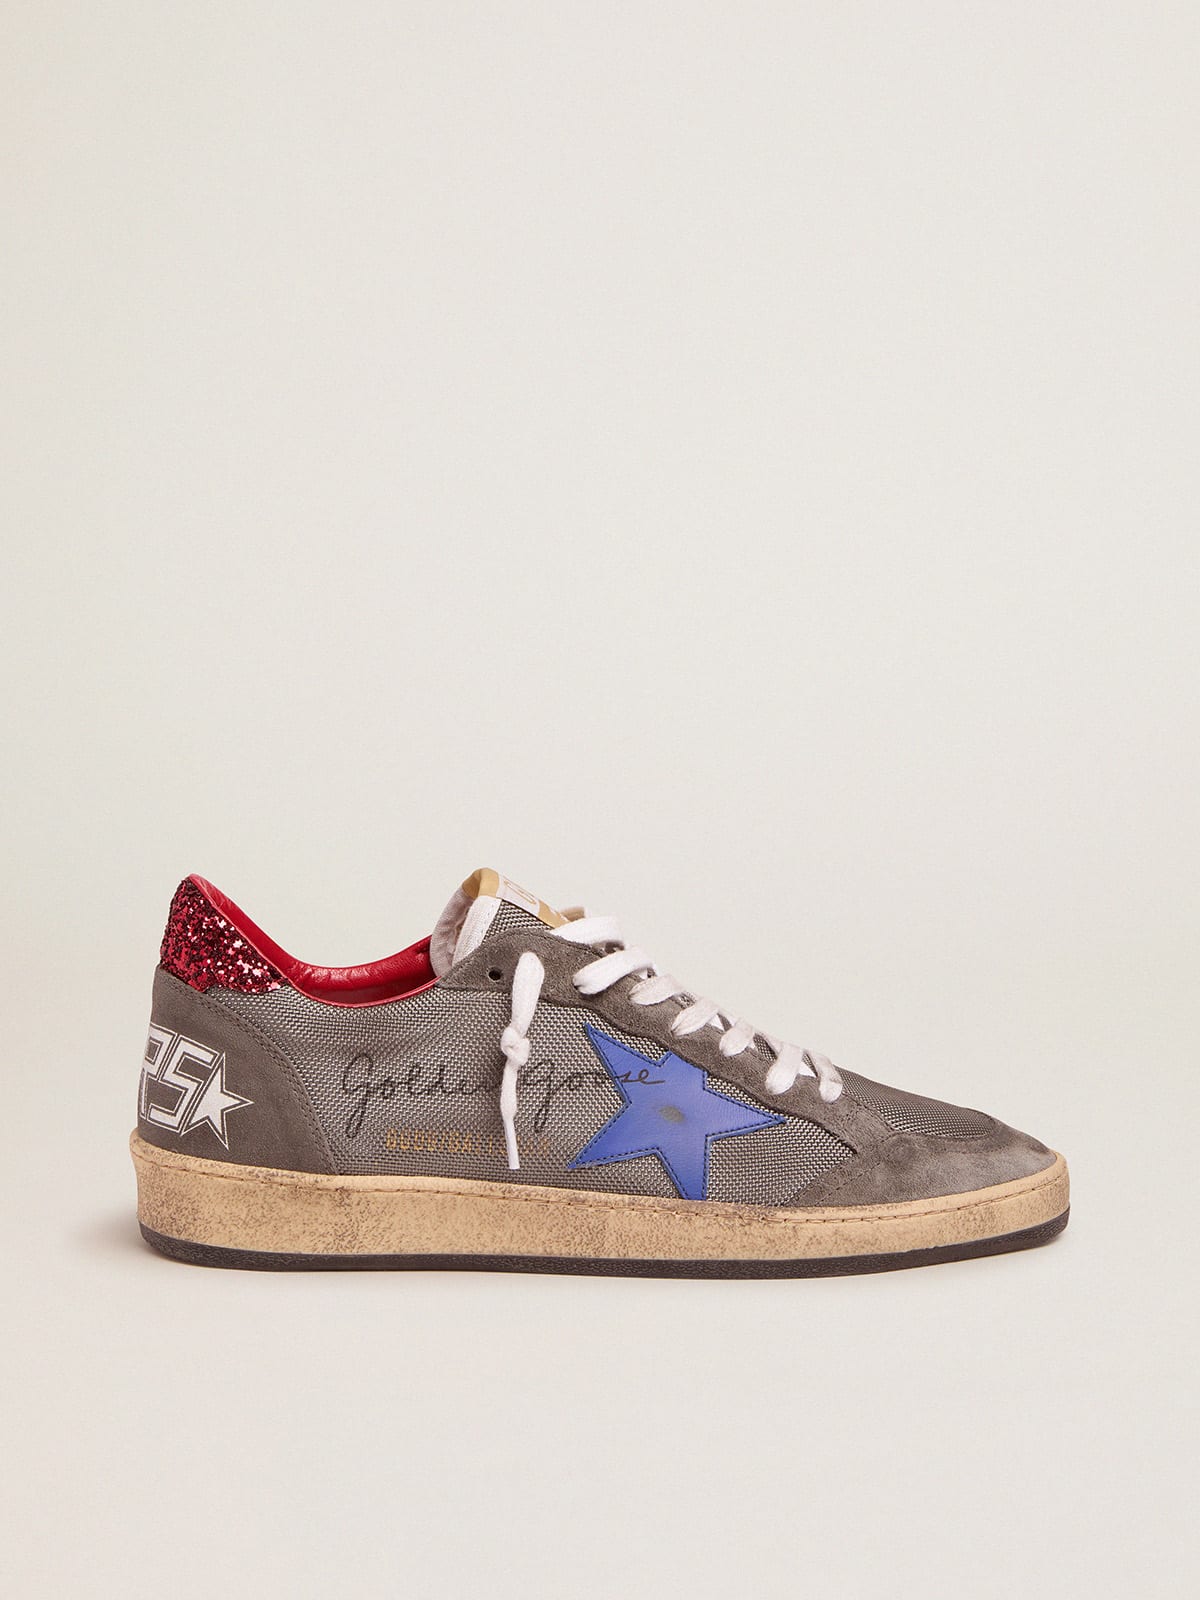 Ball Star sneakers in pale silver mesh with red glitter heel tab | Golden  Goose